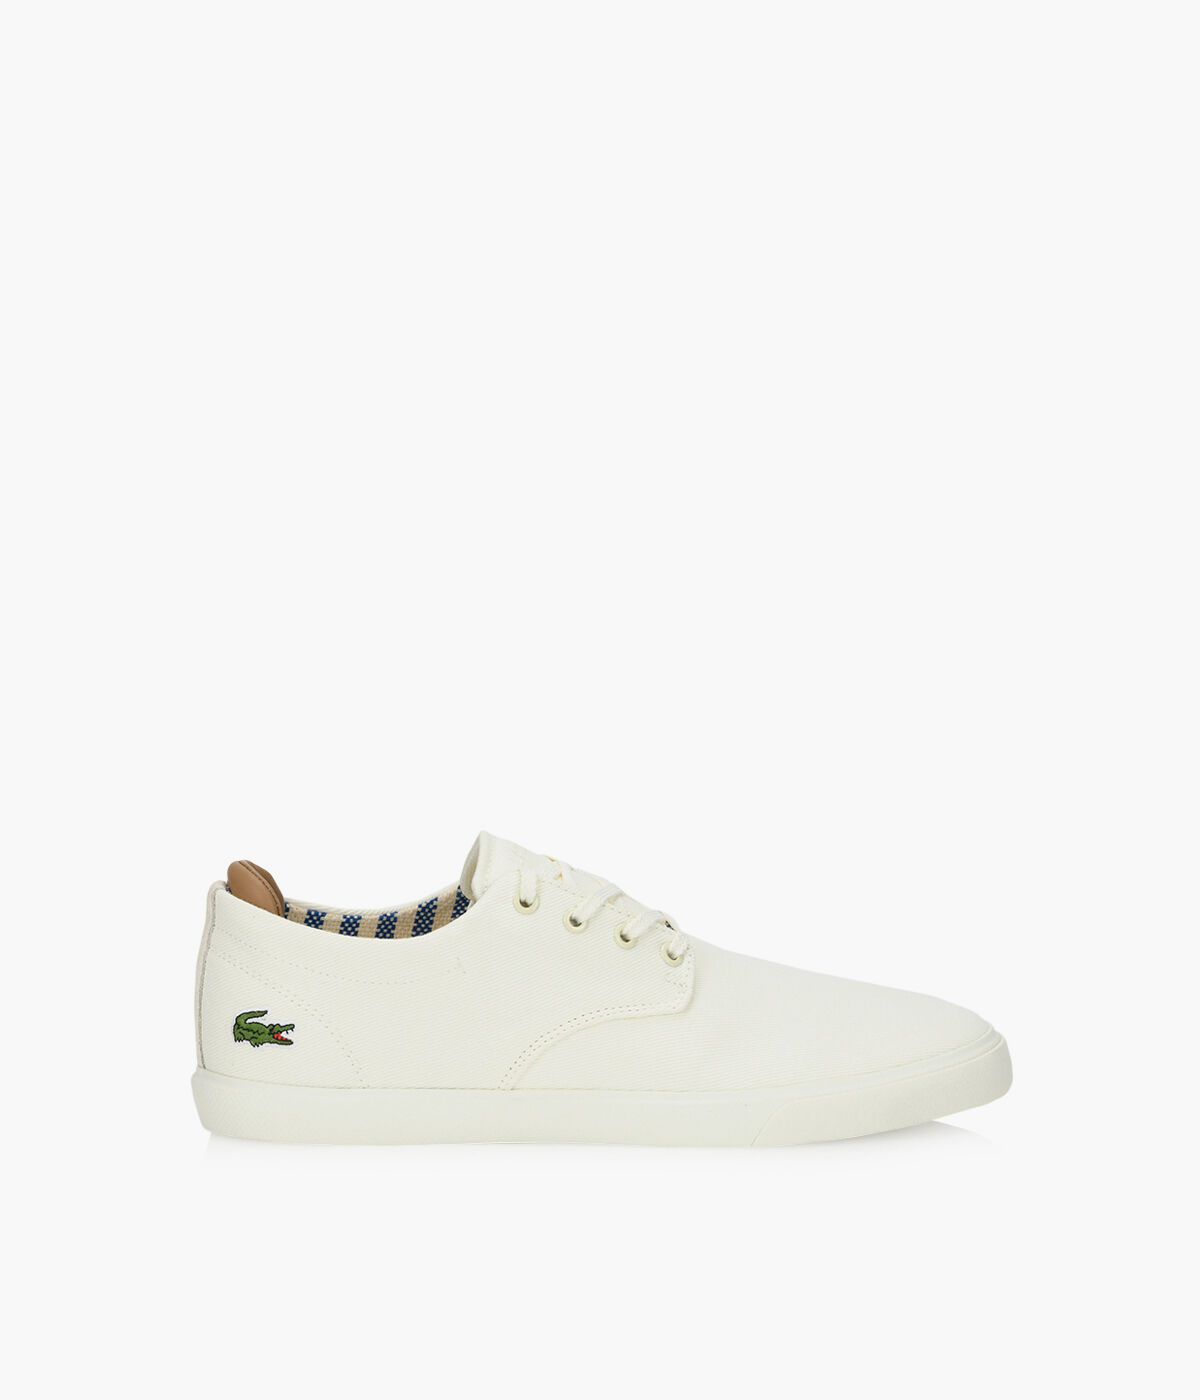 LACOSTE ESPARRE 219-1 - Fabric | Browns 